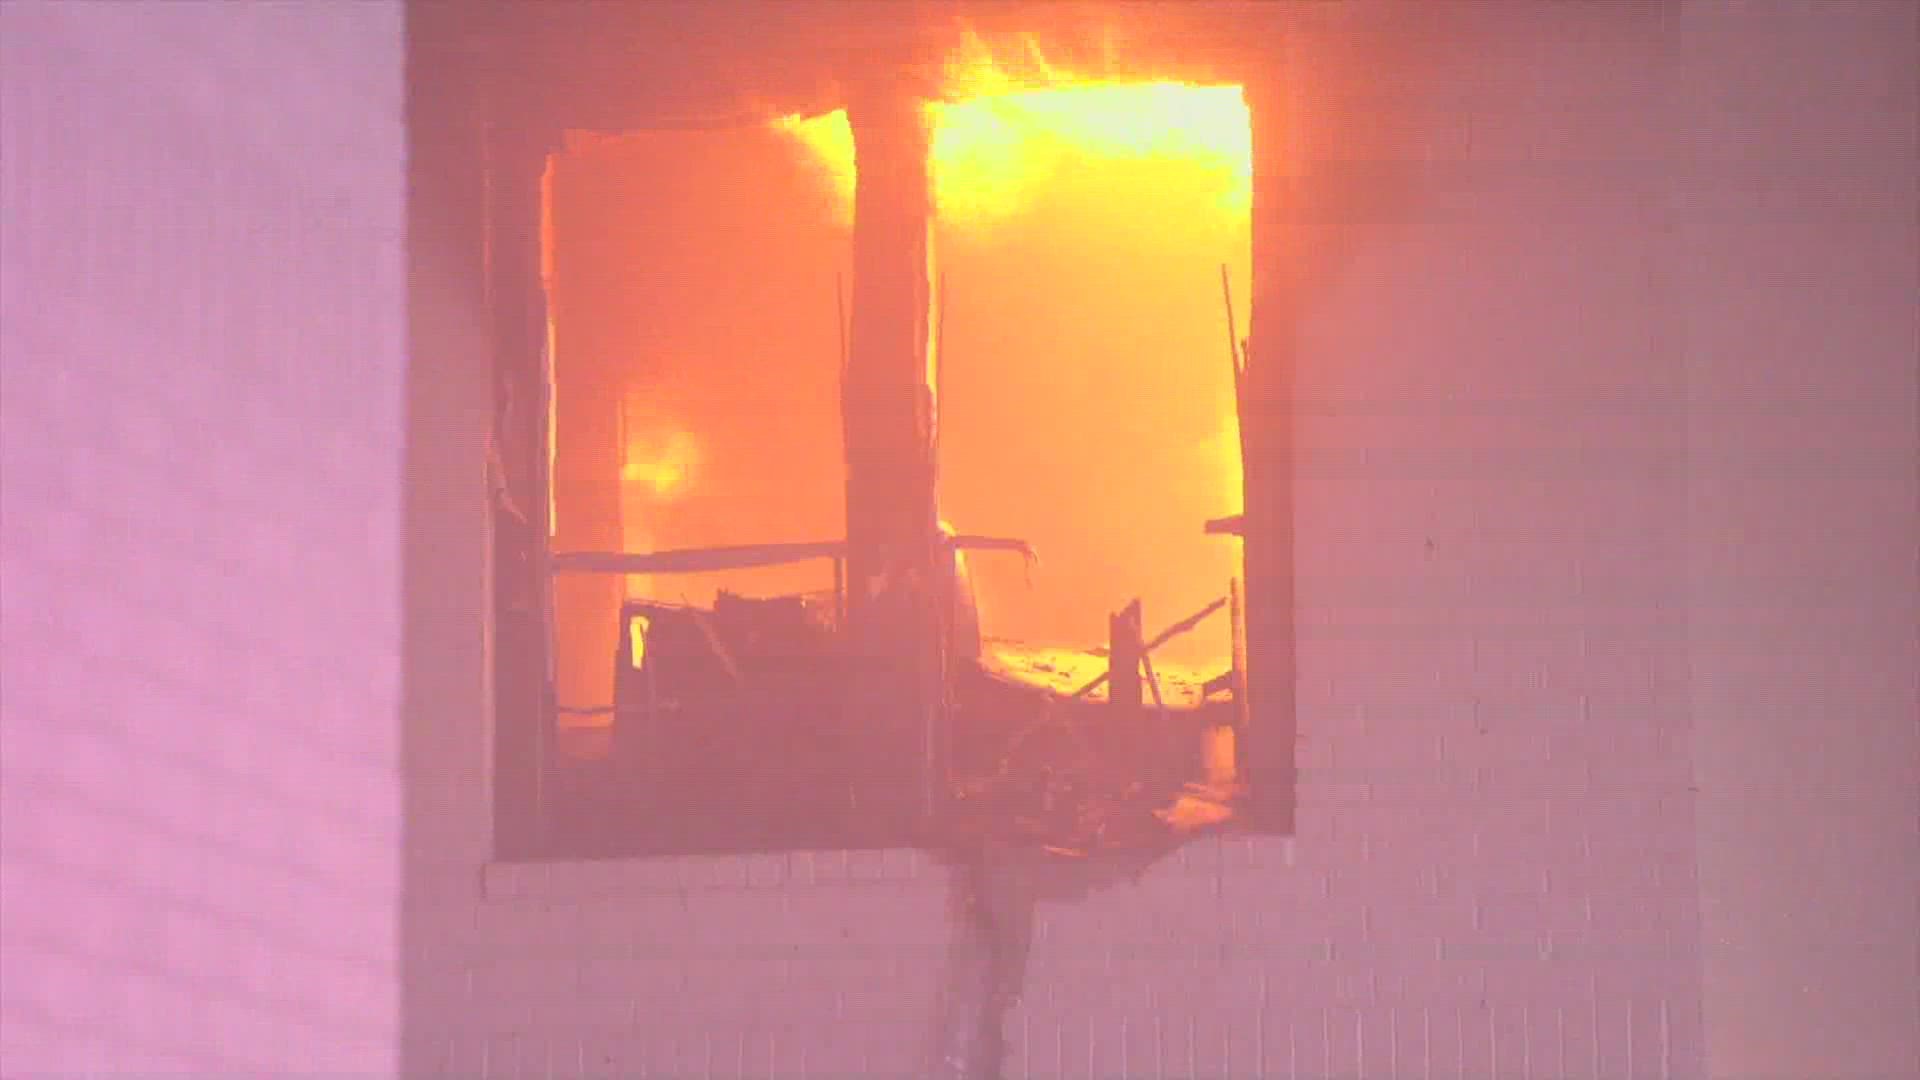 When firefighters arrived, they found heavy fire coming from a second floor apartment.